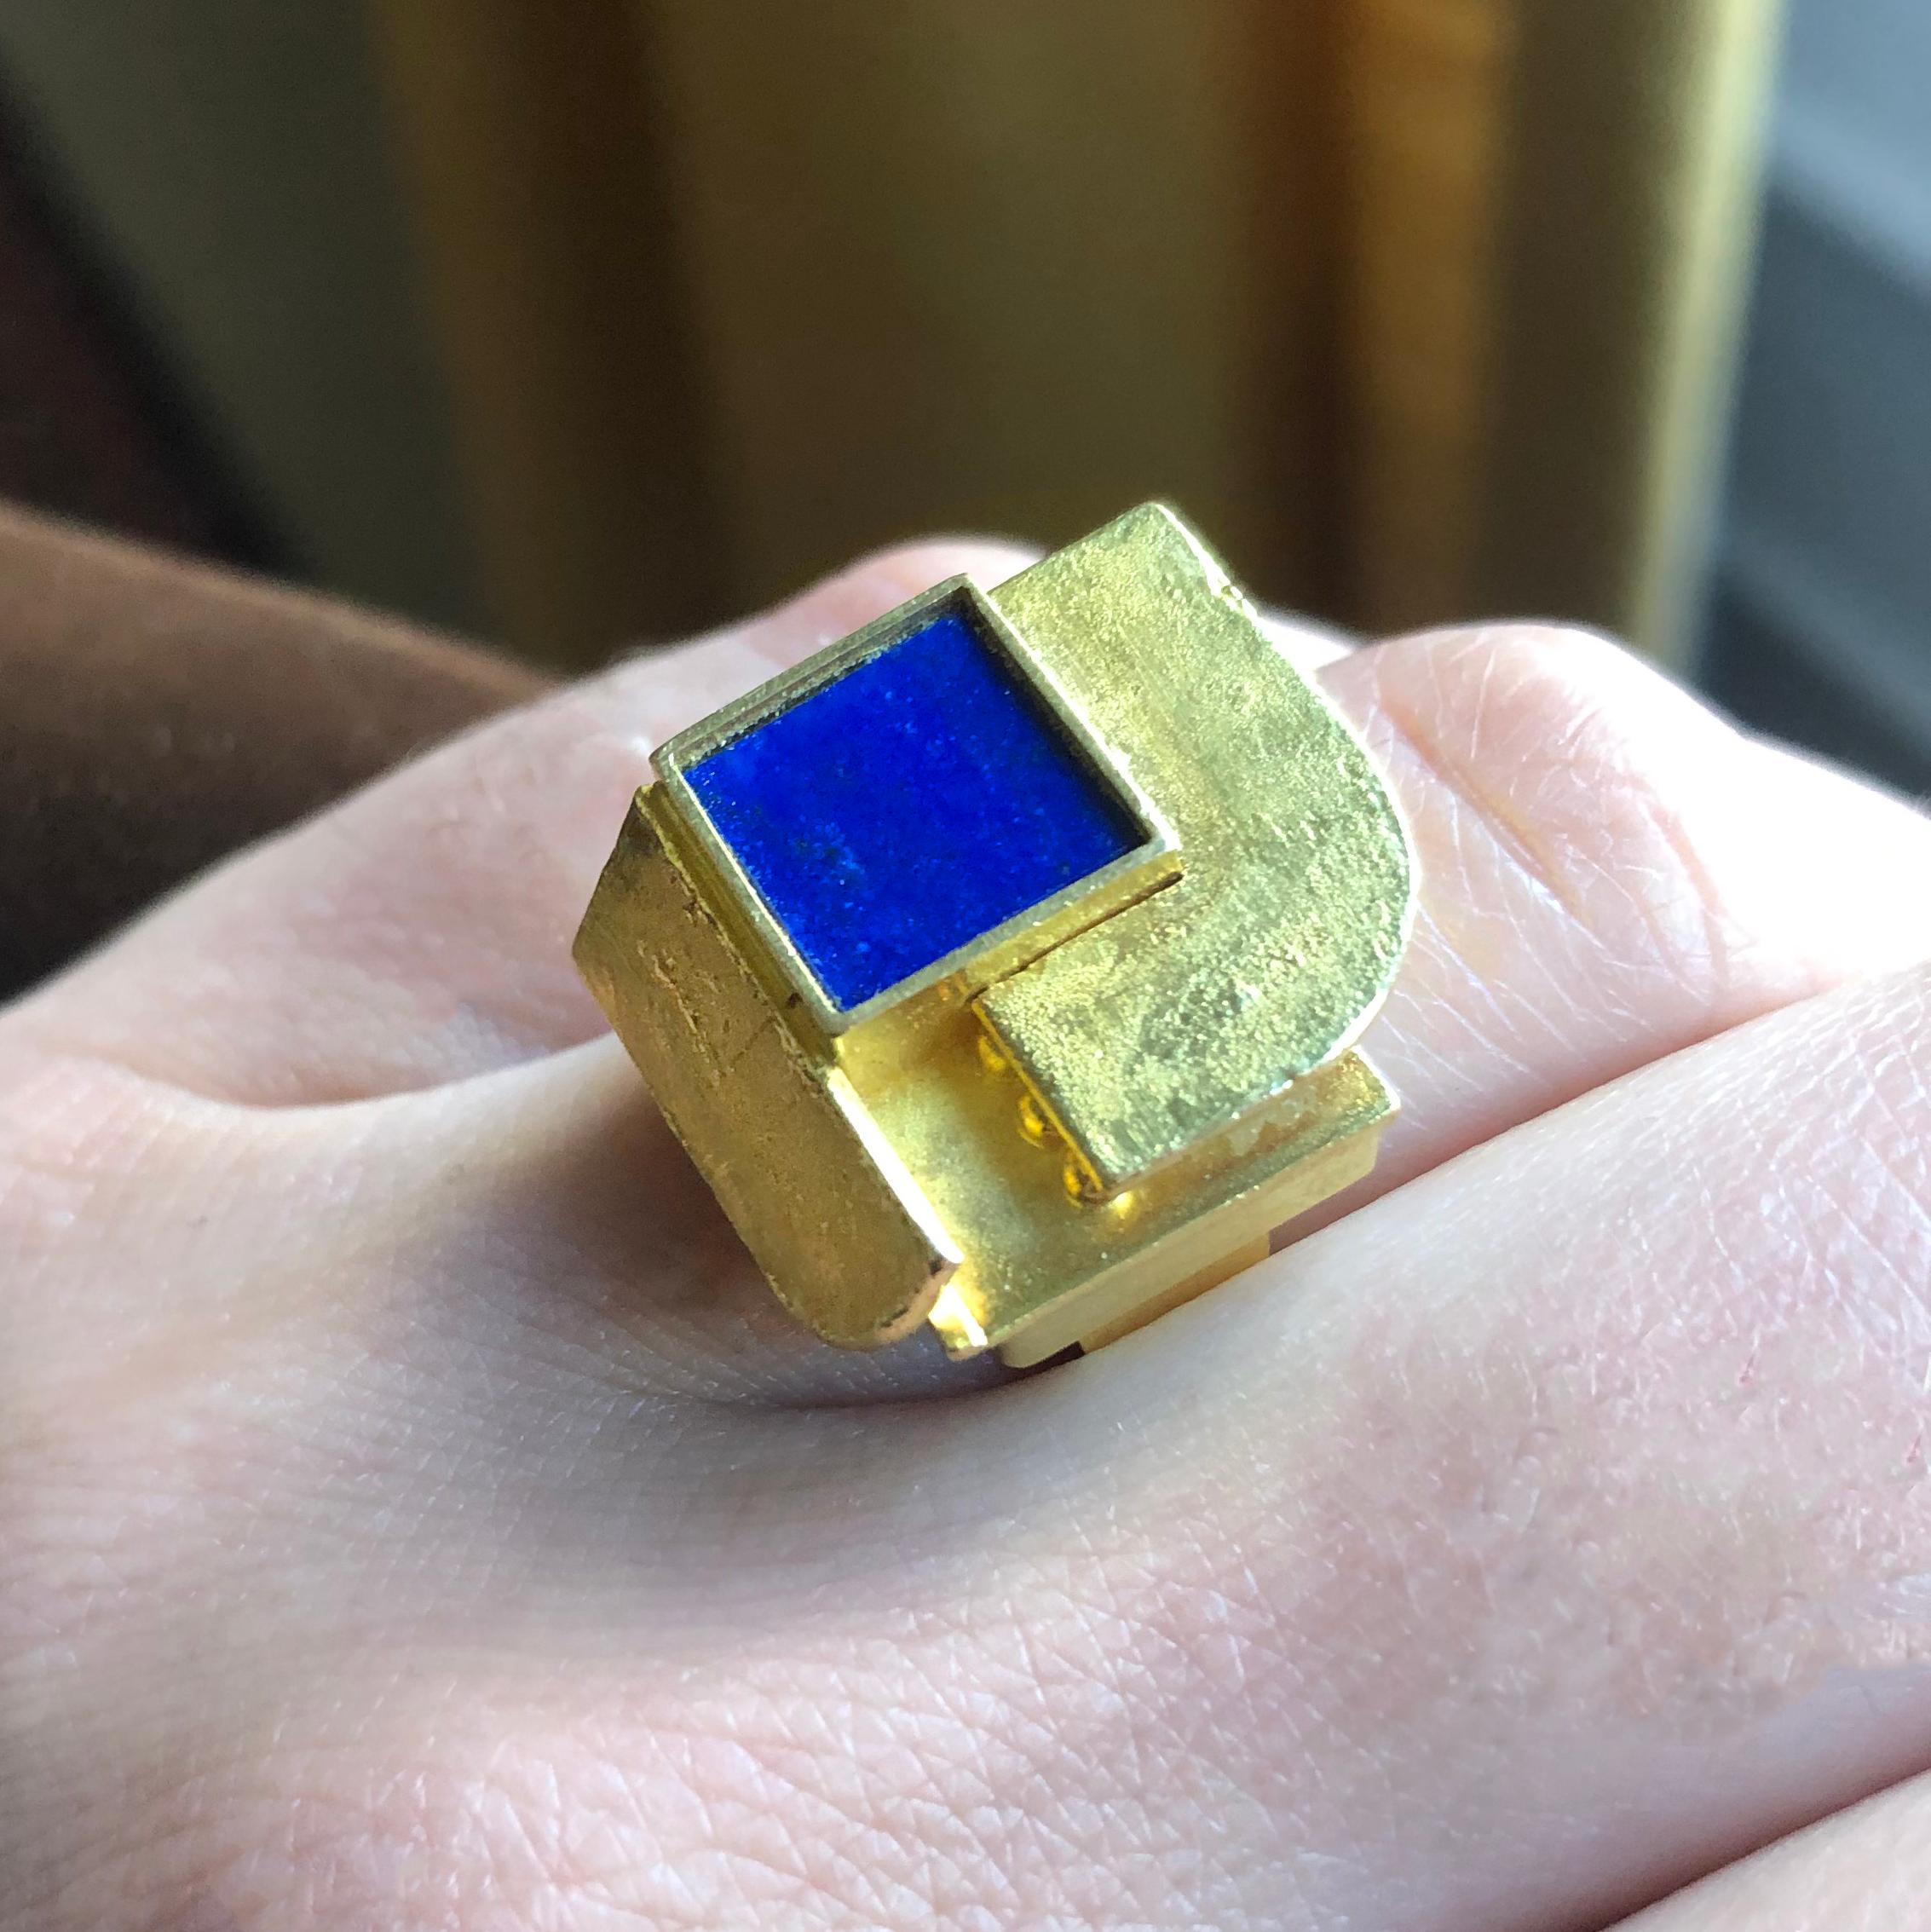 Square Cut Othmar Zschaler Lapis Lazuli and Gold Modernist Ring For Sale